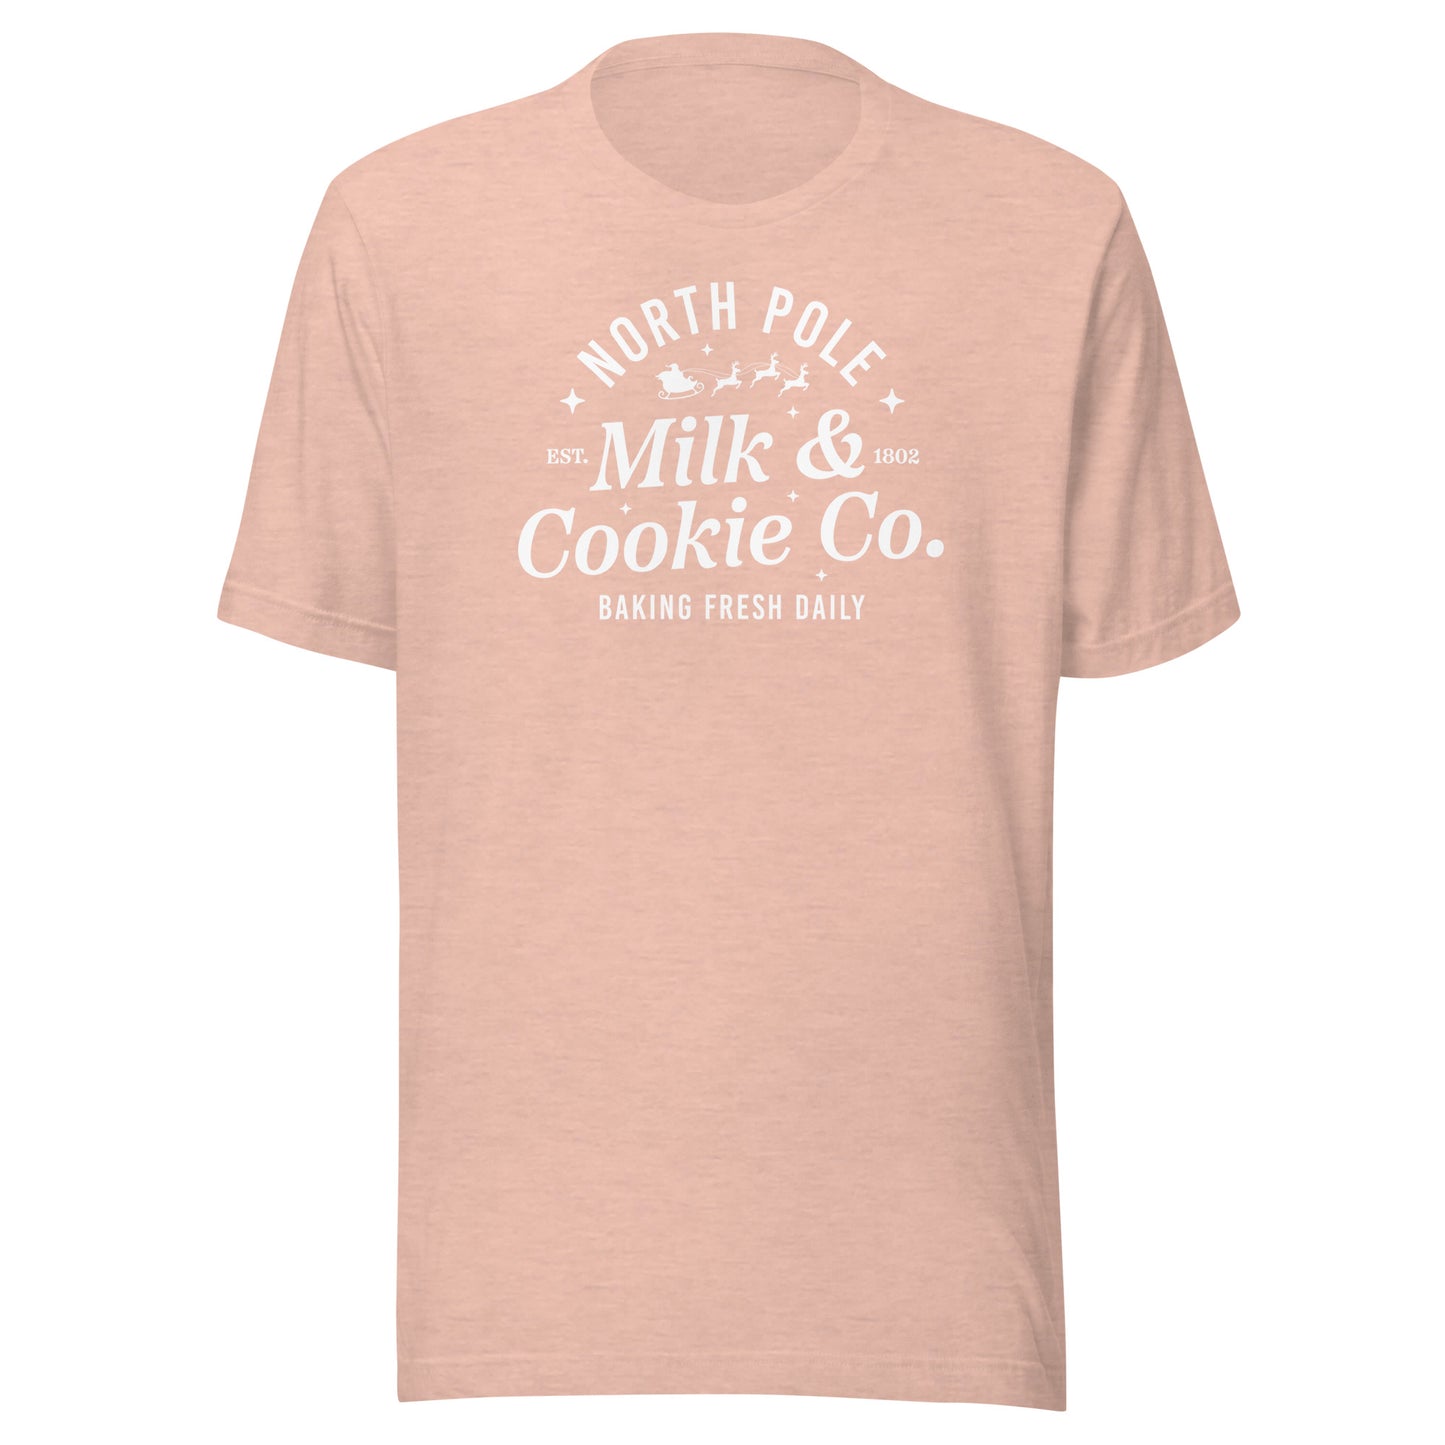 Milk and Cookie Co. T-Shirt